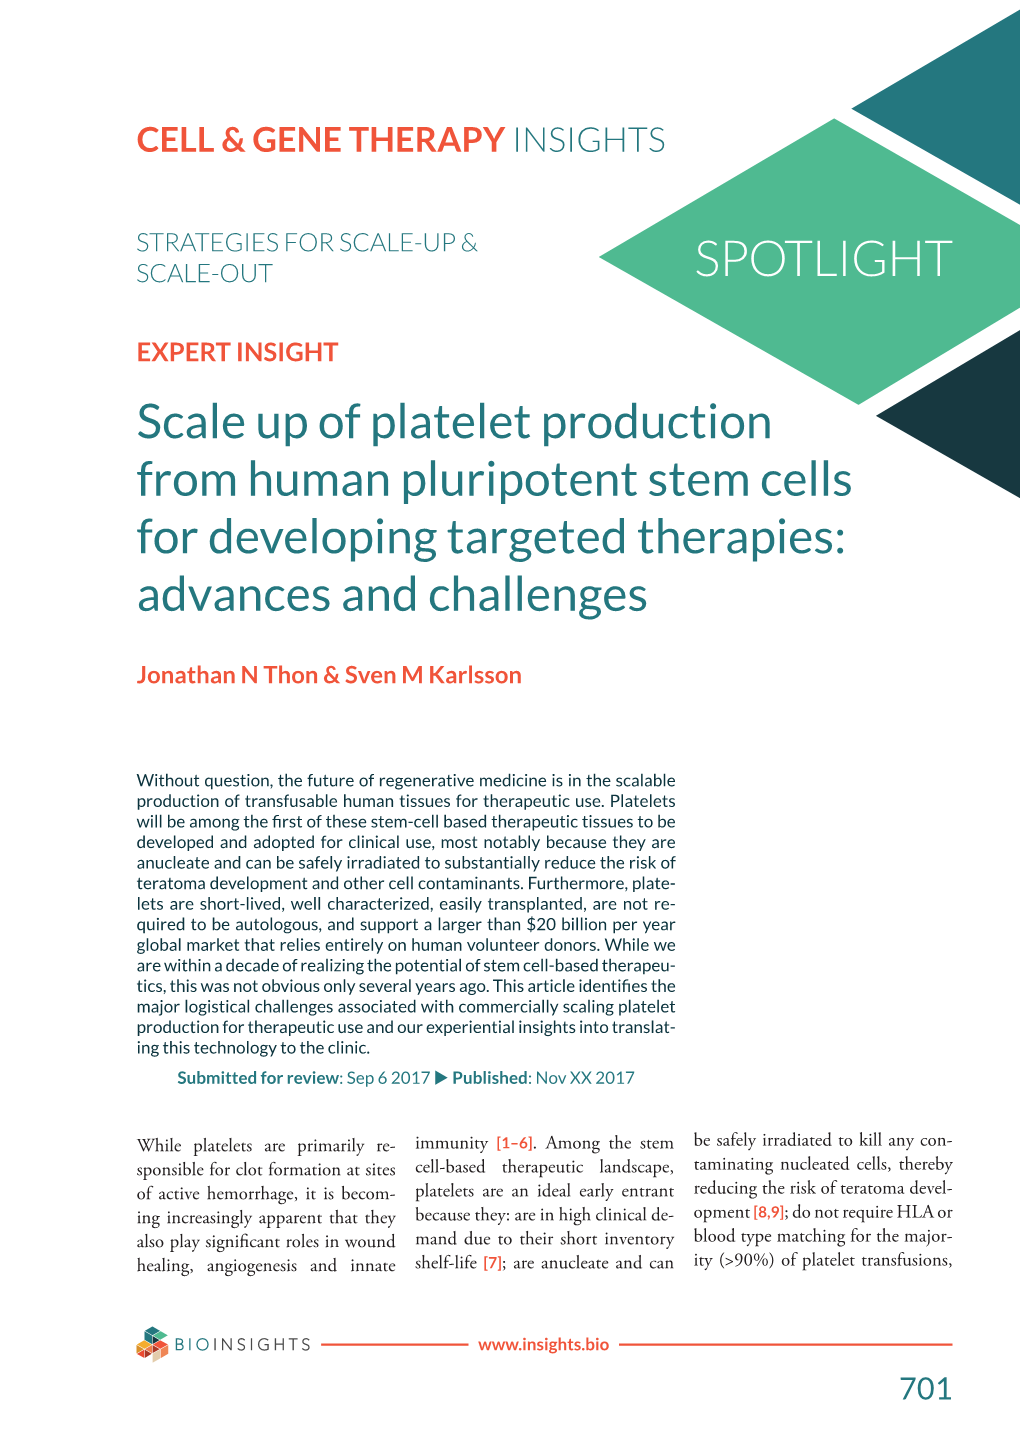 Scale up of Platelet Production from Human Pluripotent Stem Cells for Developing Targeted Therapies: Advances and Challenges